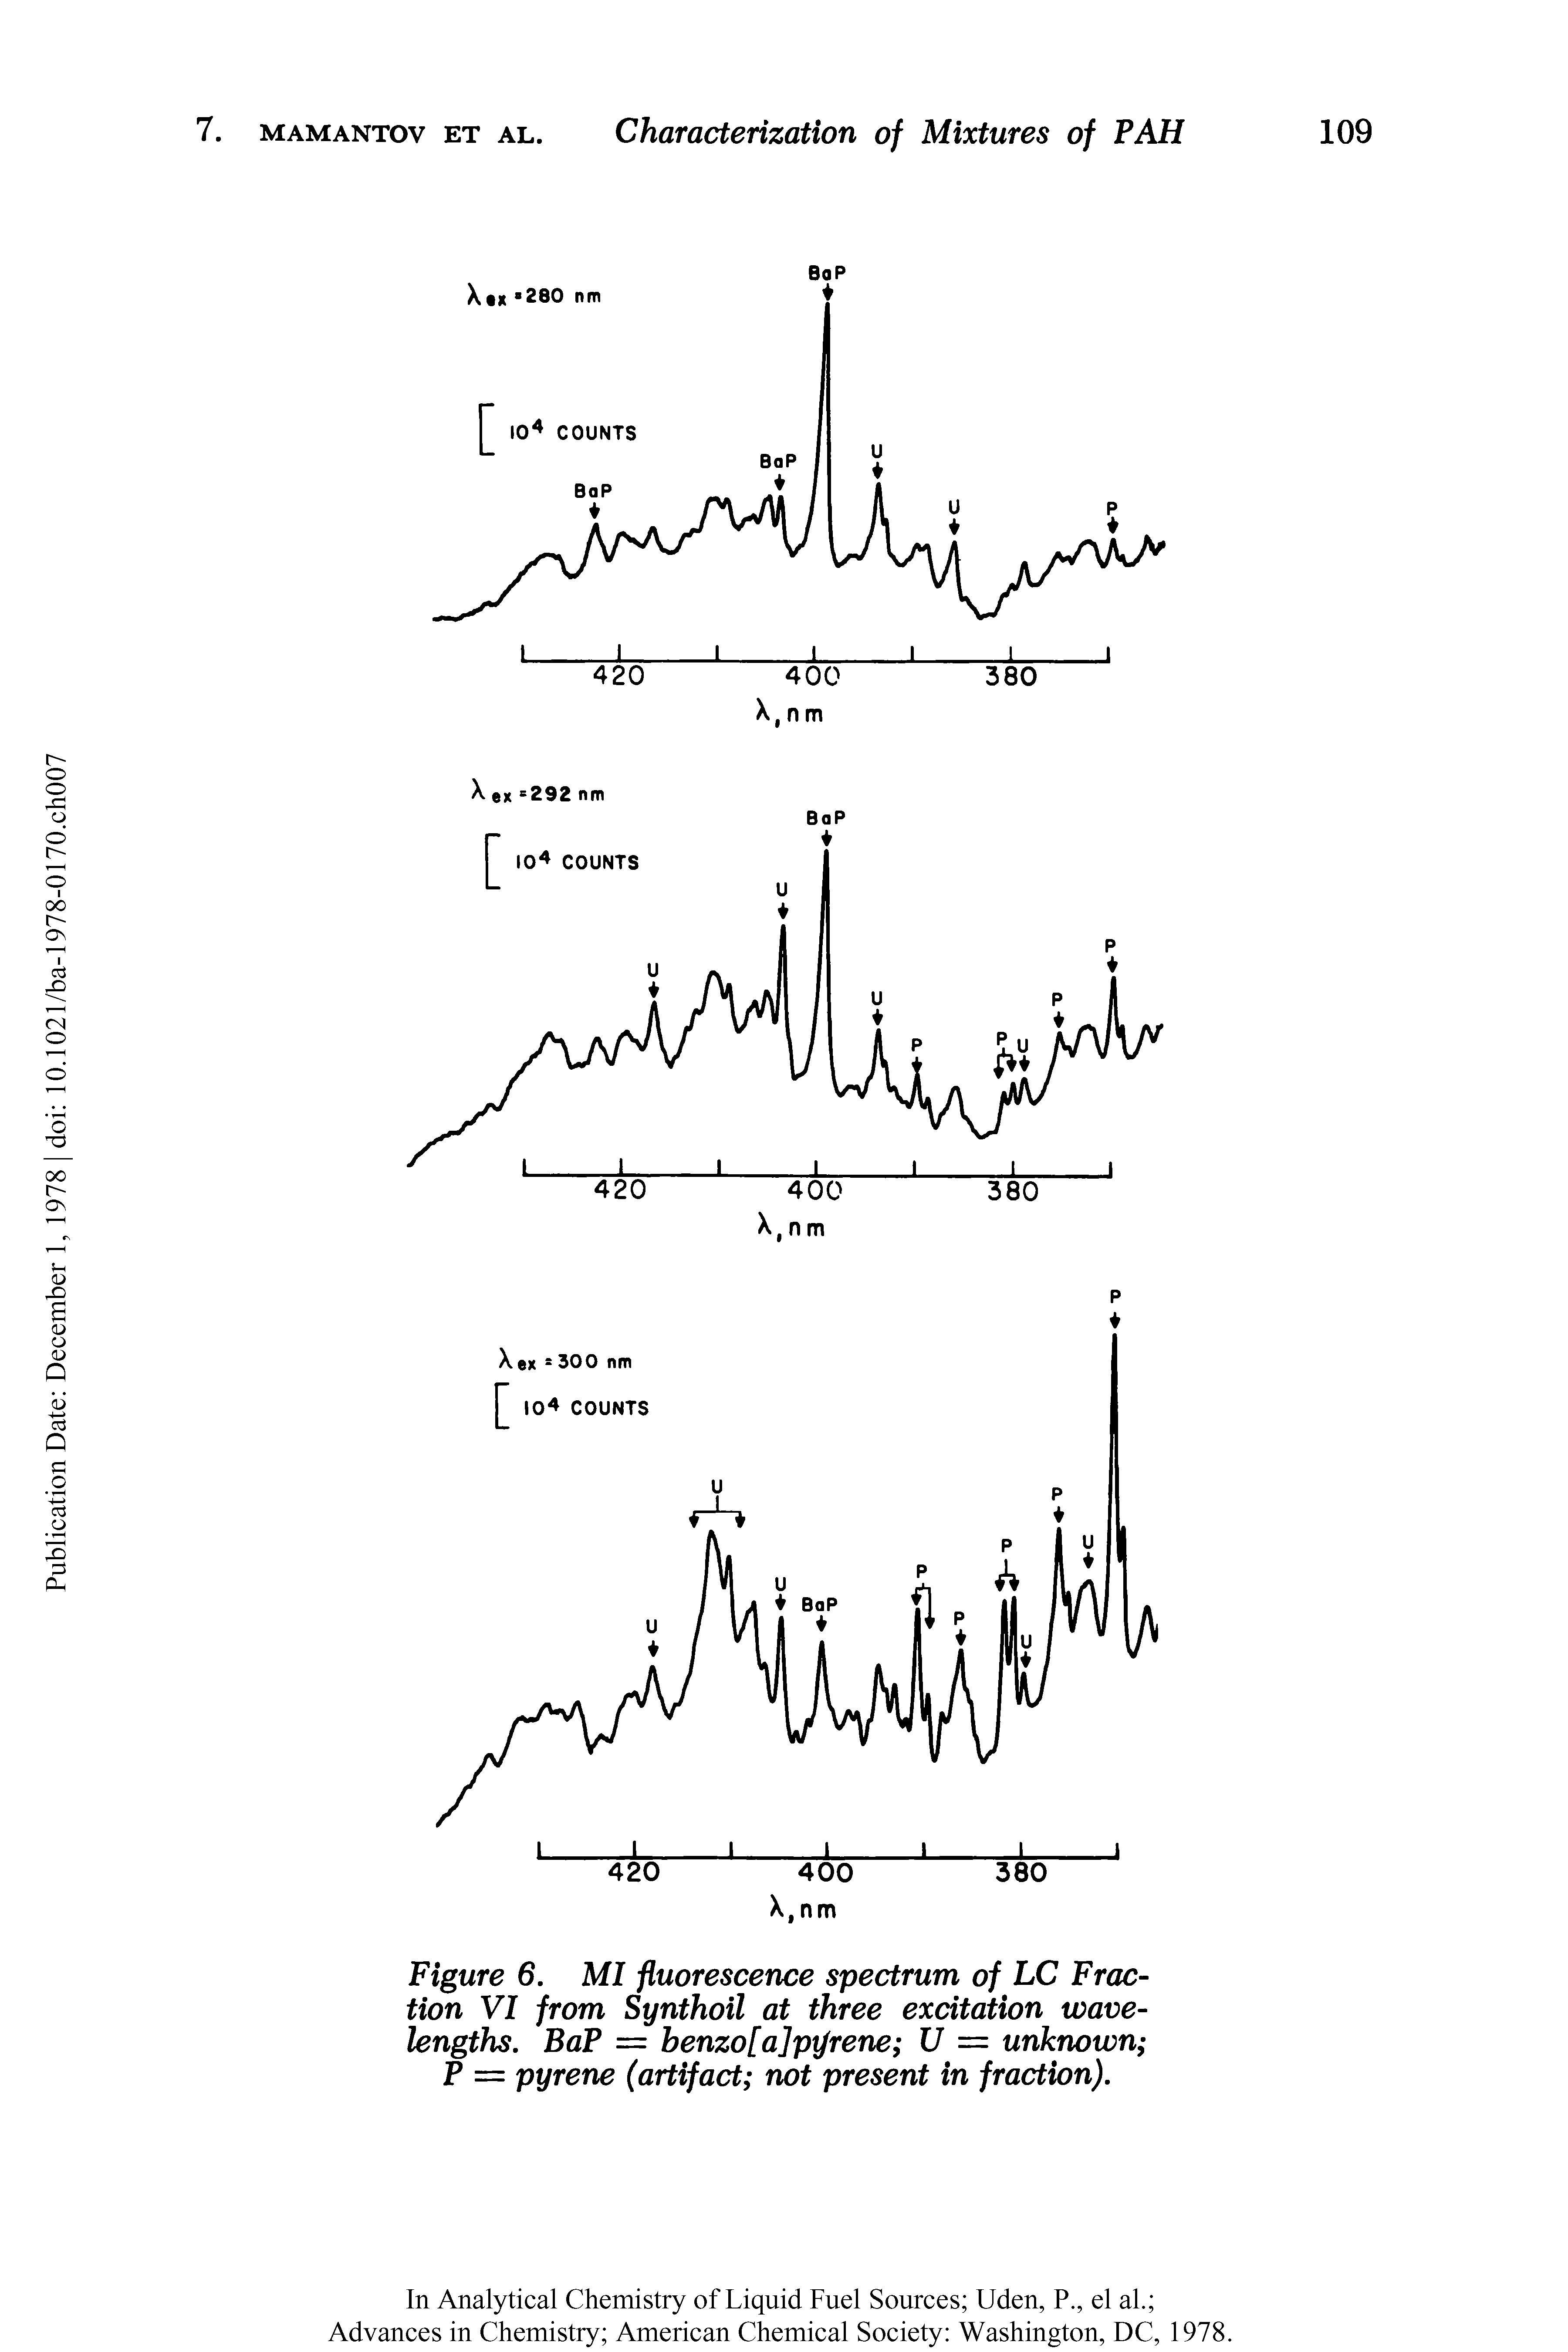 Figure 6. MI fluorescence spectrum of LC Fraction VI from Synthoil at three excitation wavelengths. BaP = benzo[a]pxjrene U = unknown P = pyrene (artifact not present in fraction).